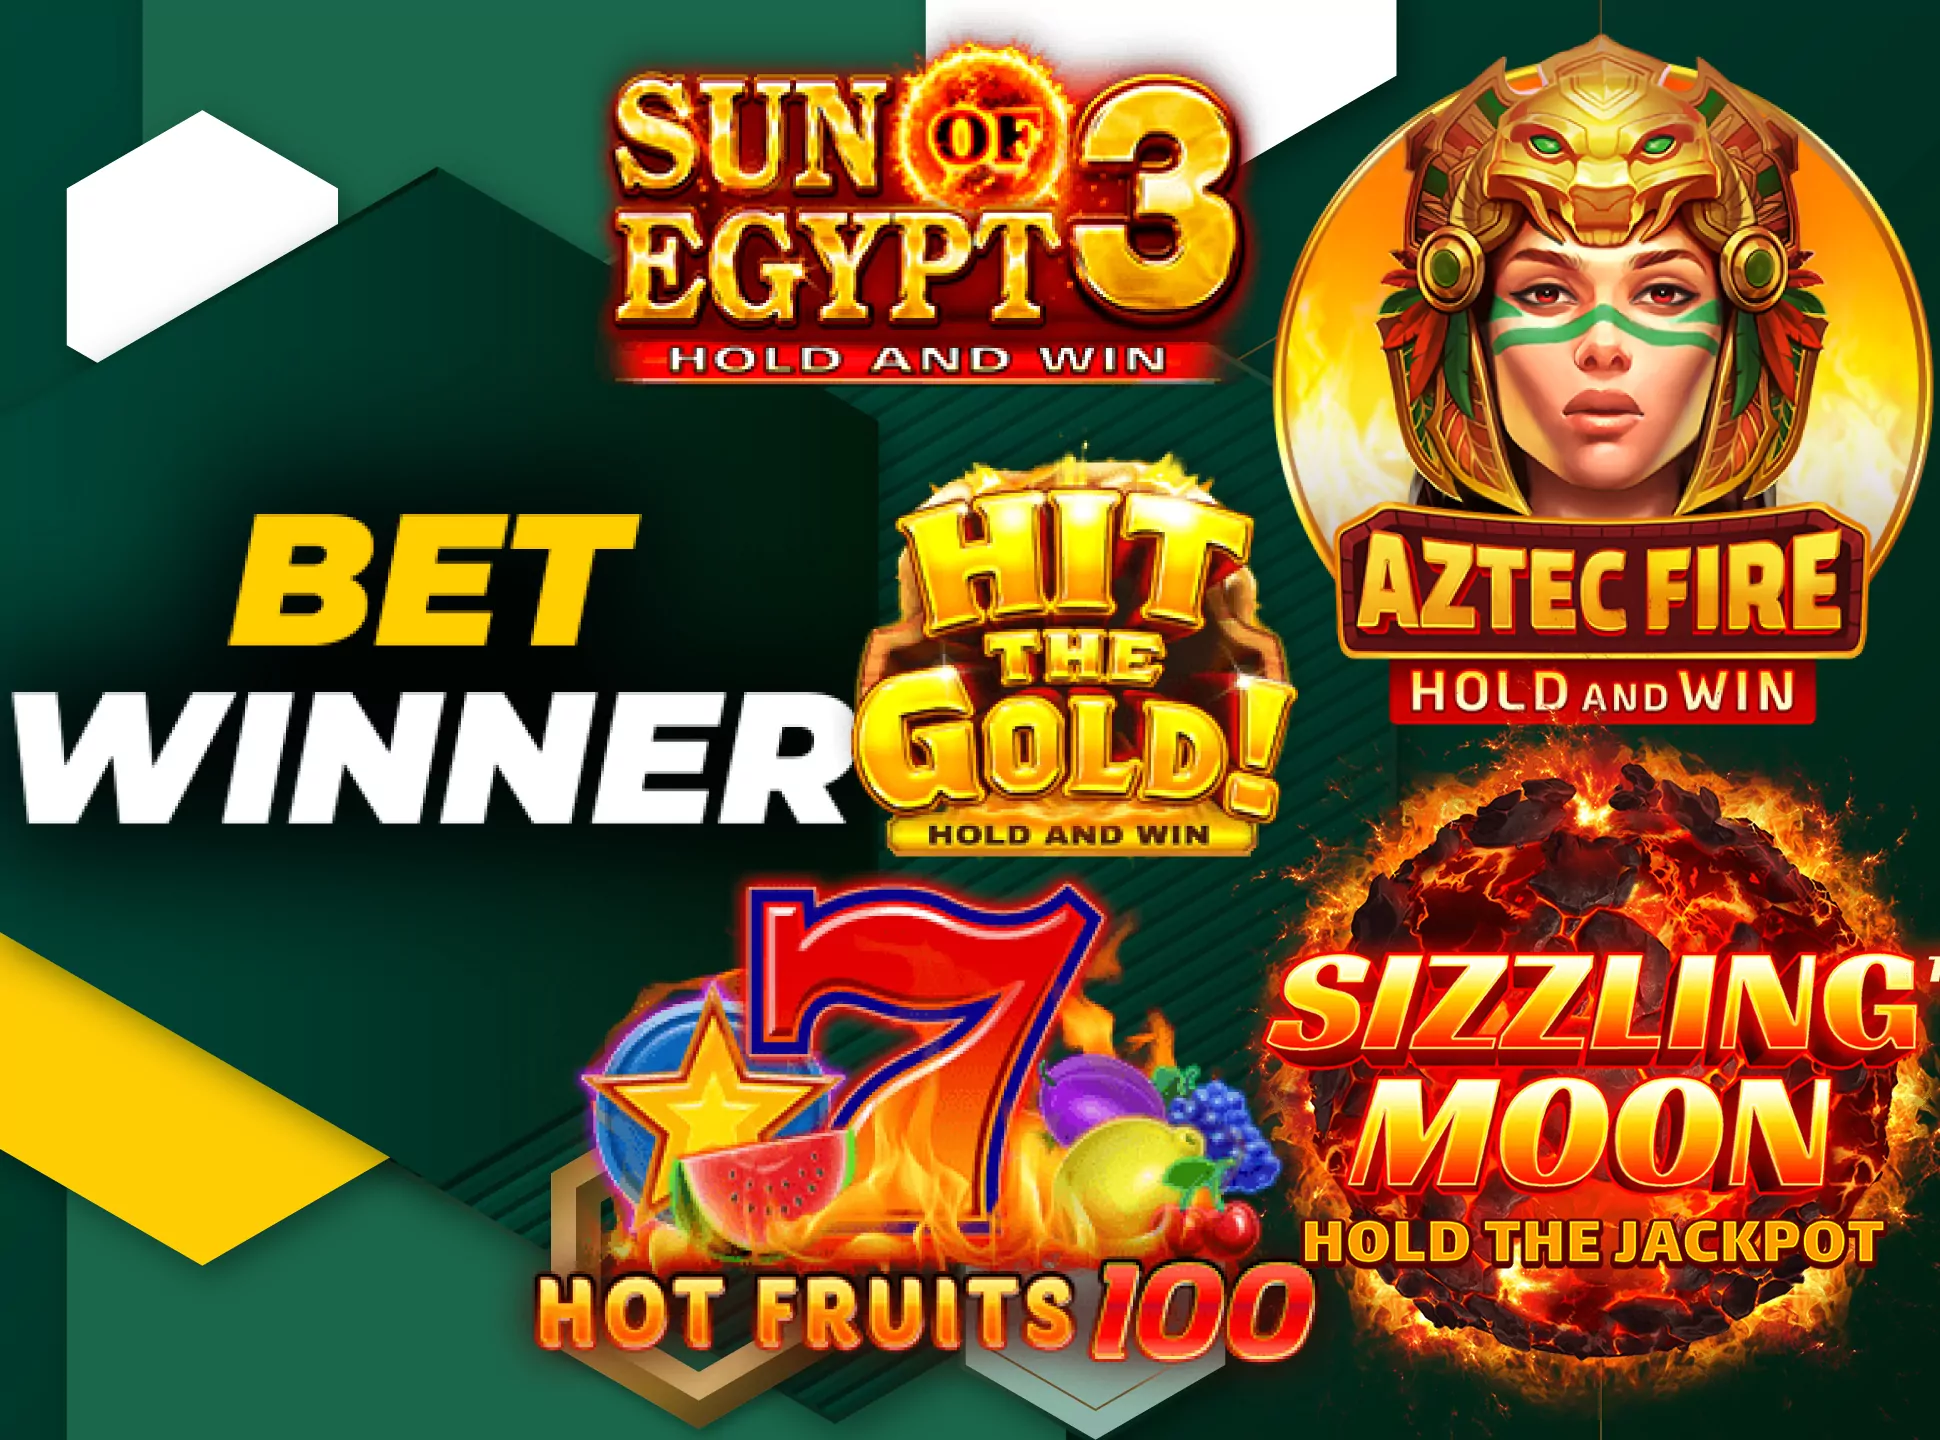 There are lots of slots including the mos popular ones in the Betwinner casino.